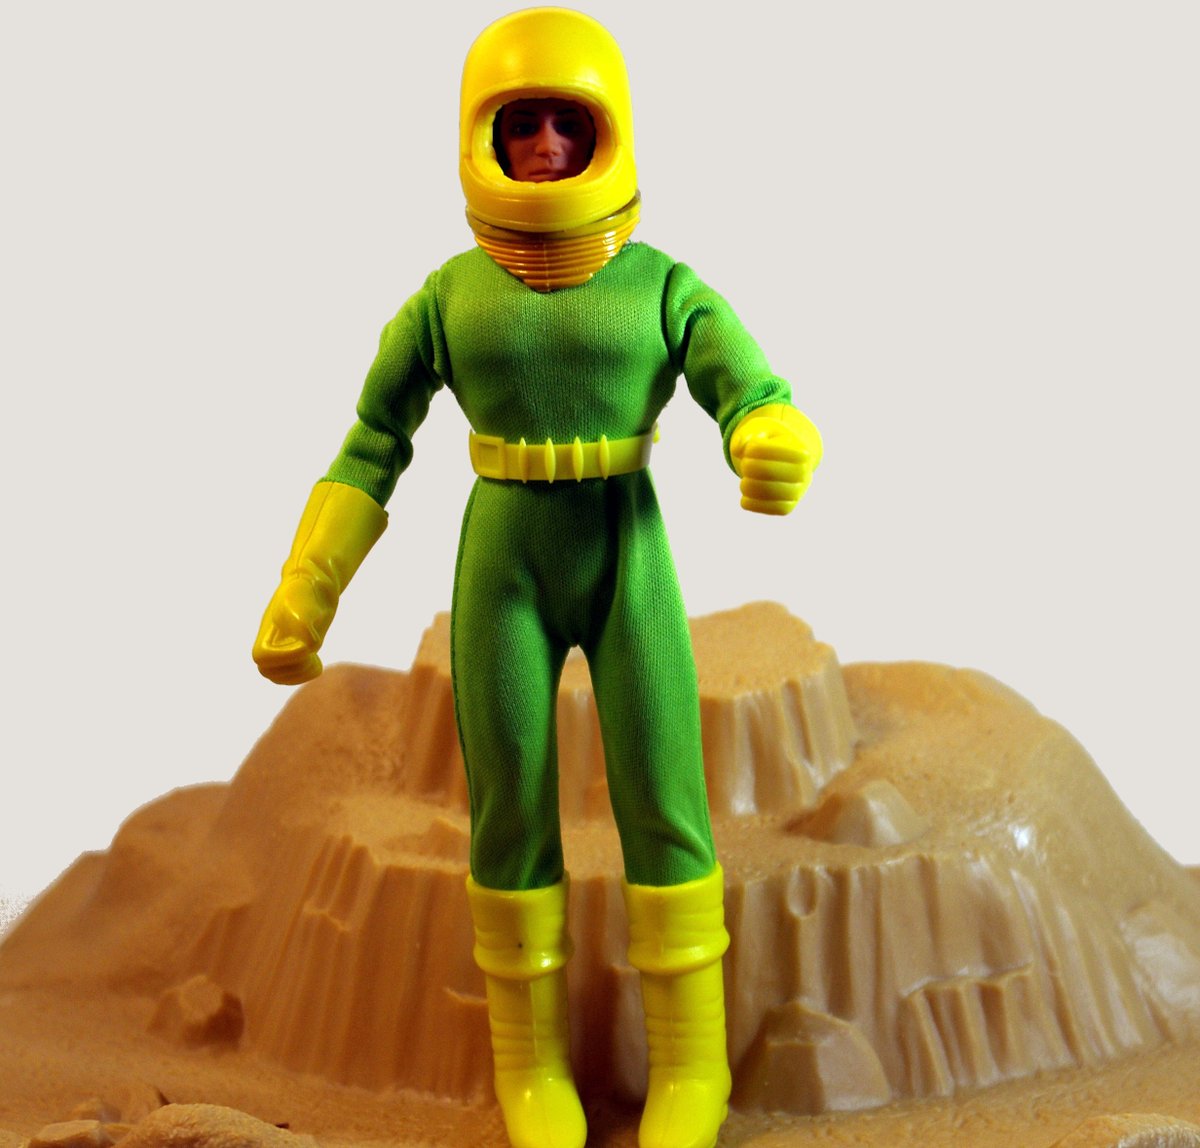 Some original custom  #mego style toys, this time Golden Age Super Heroes by  #fletcherHanks and  #basilWolverton, Spacehawk, Fantomah, and Stardust The Super Wizard from our Earth's First Comic Book Heroes line. Fantomah is probably the first super powered woman in comics!